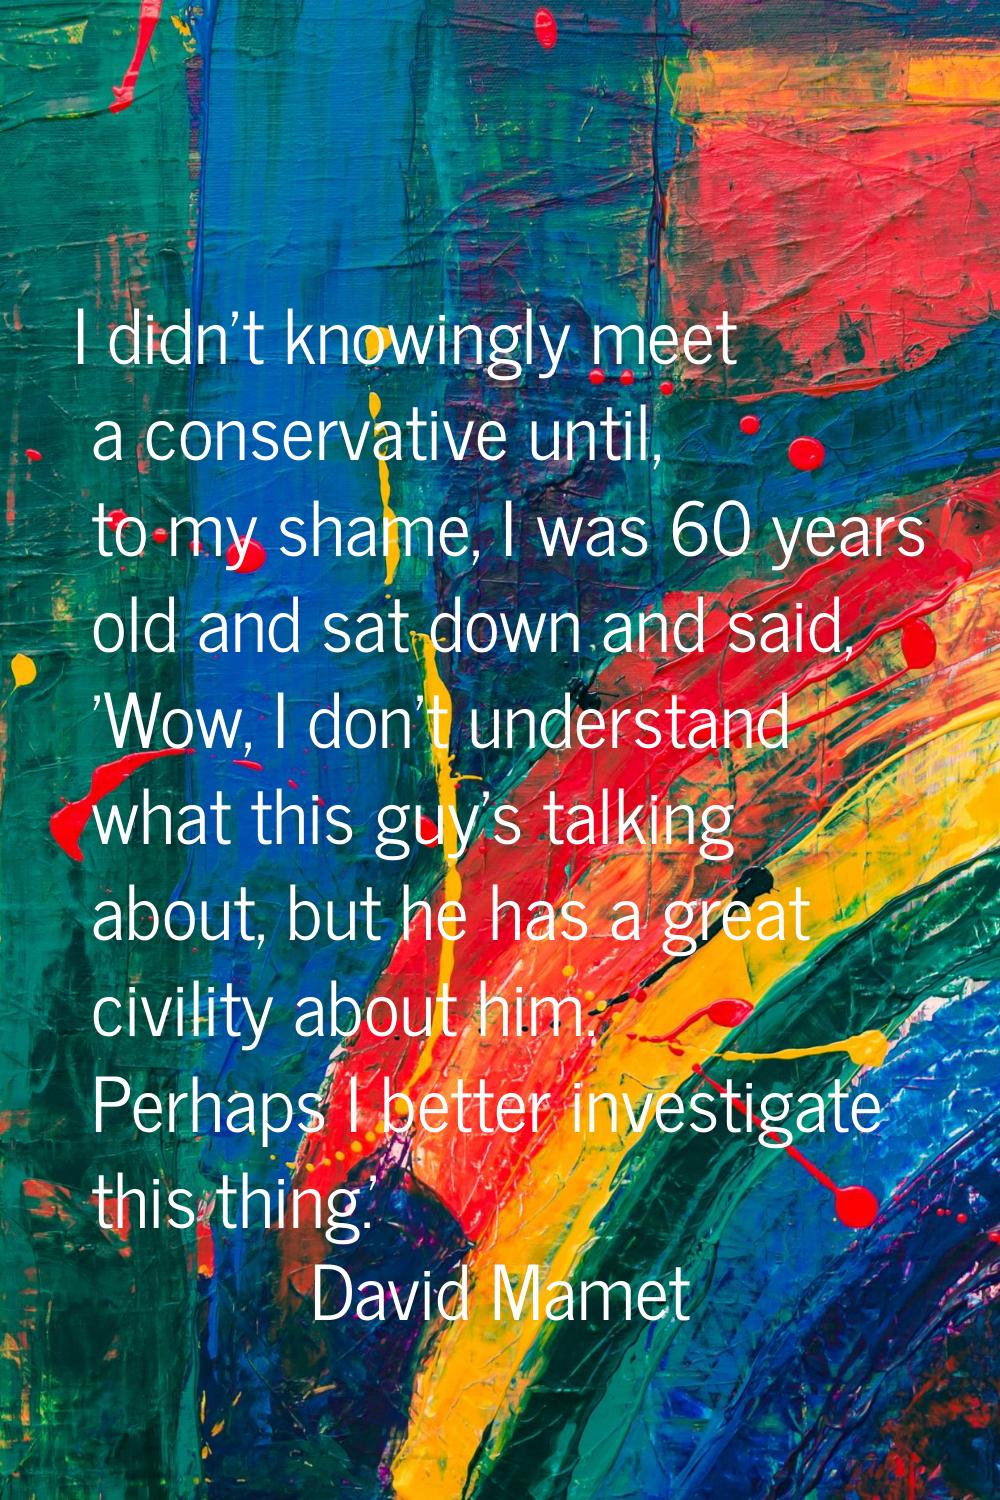 I didn't knowingly meet a conservative until, to my shame, I was 60 years old and sat down and said